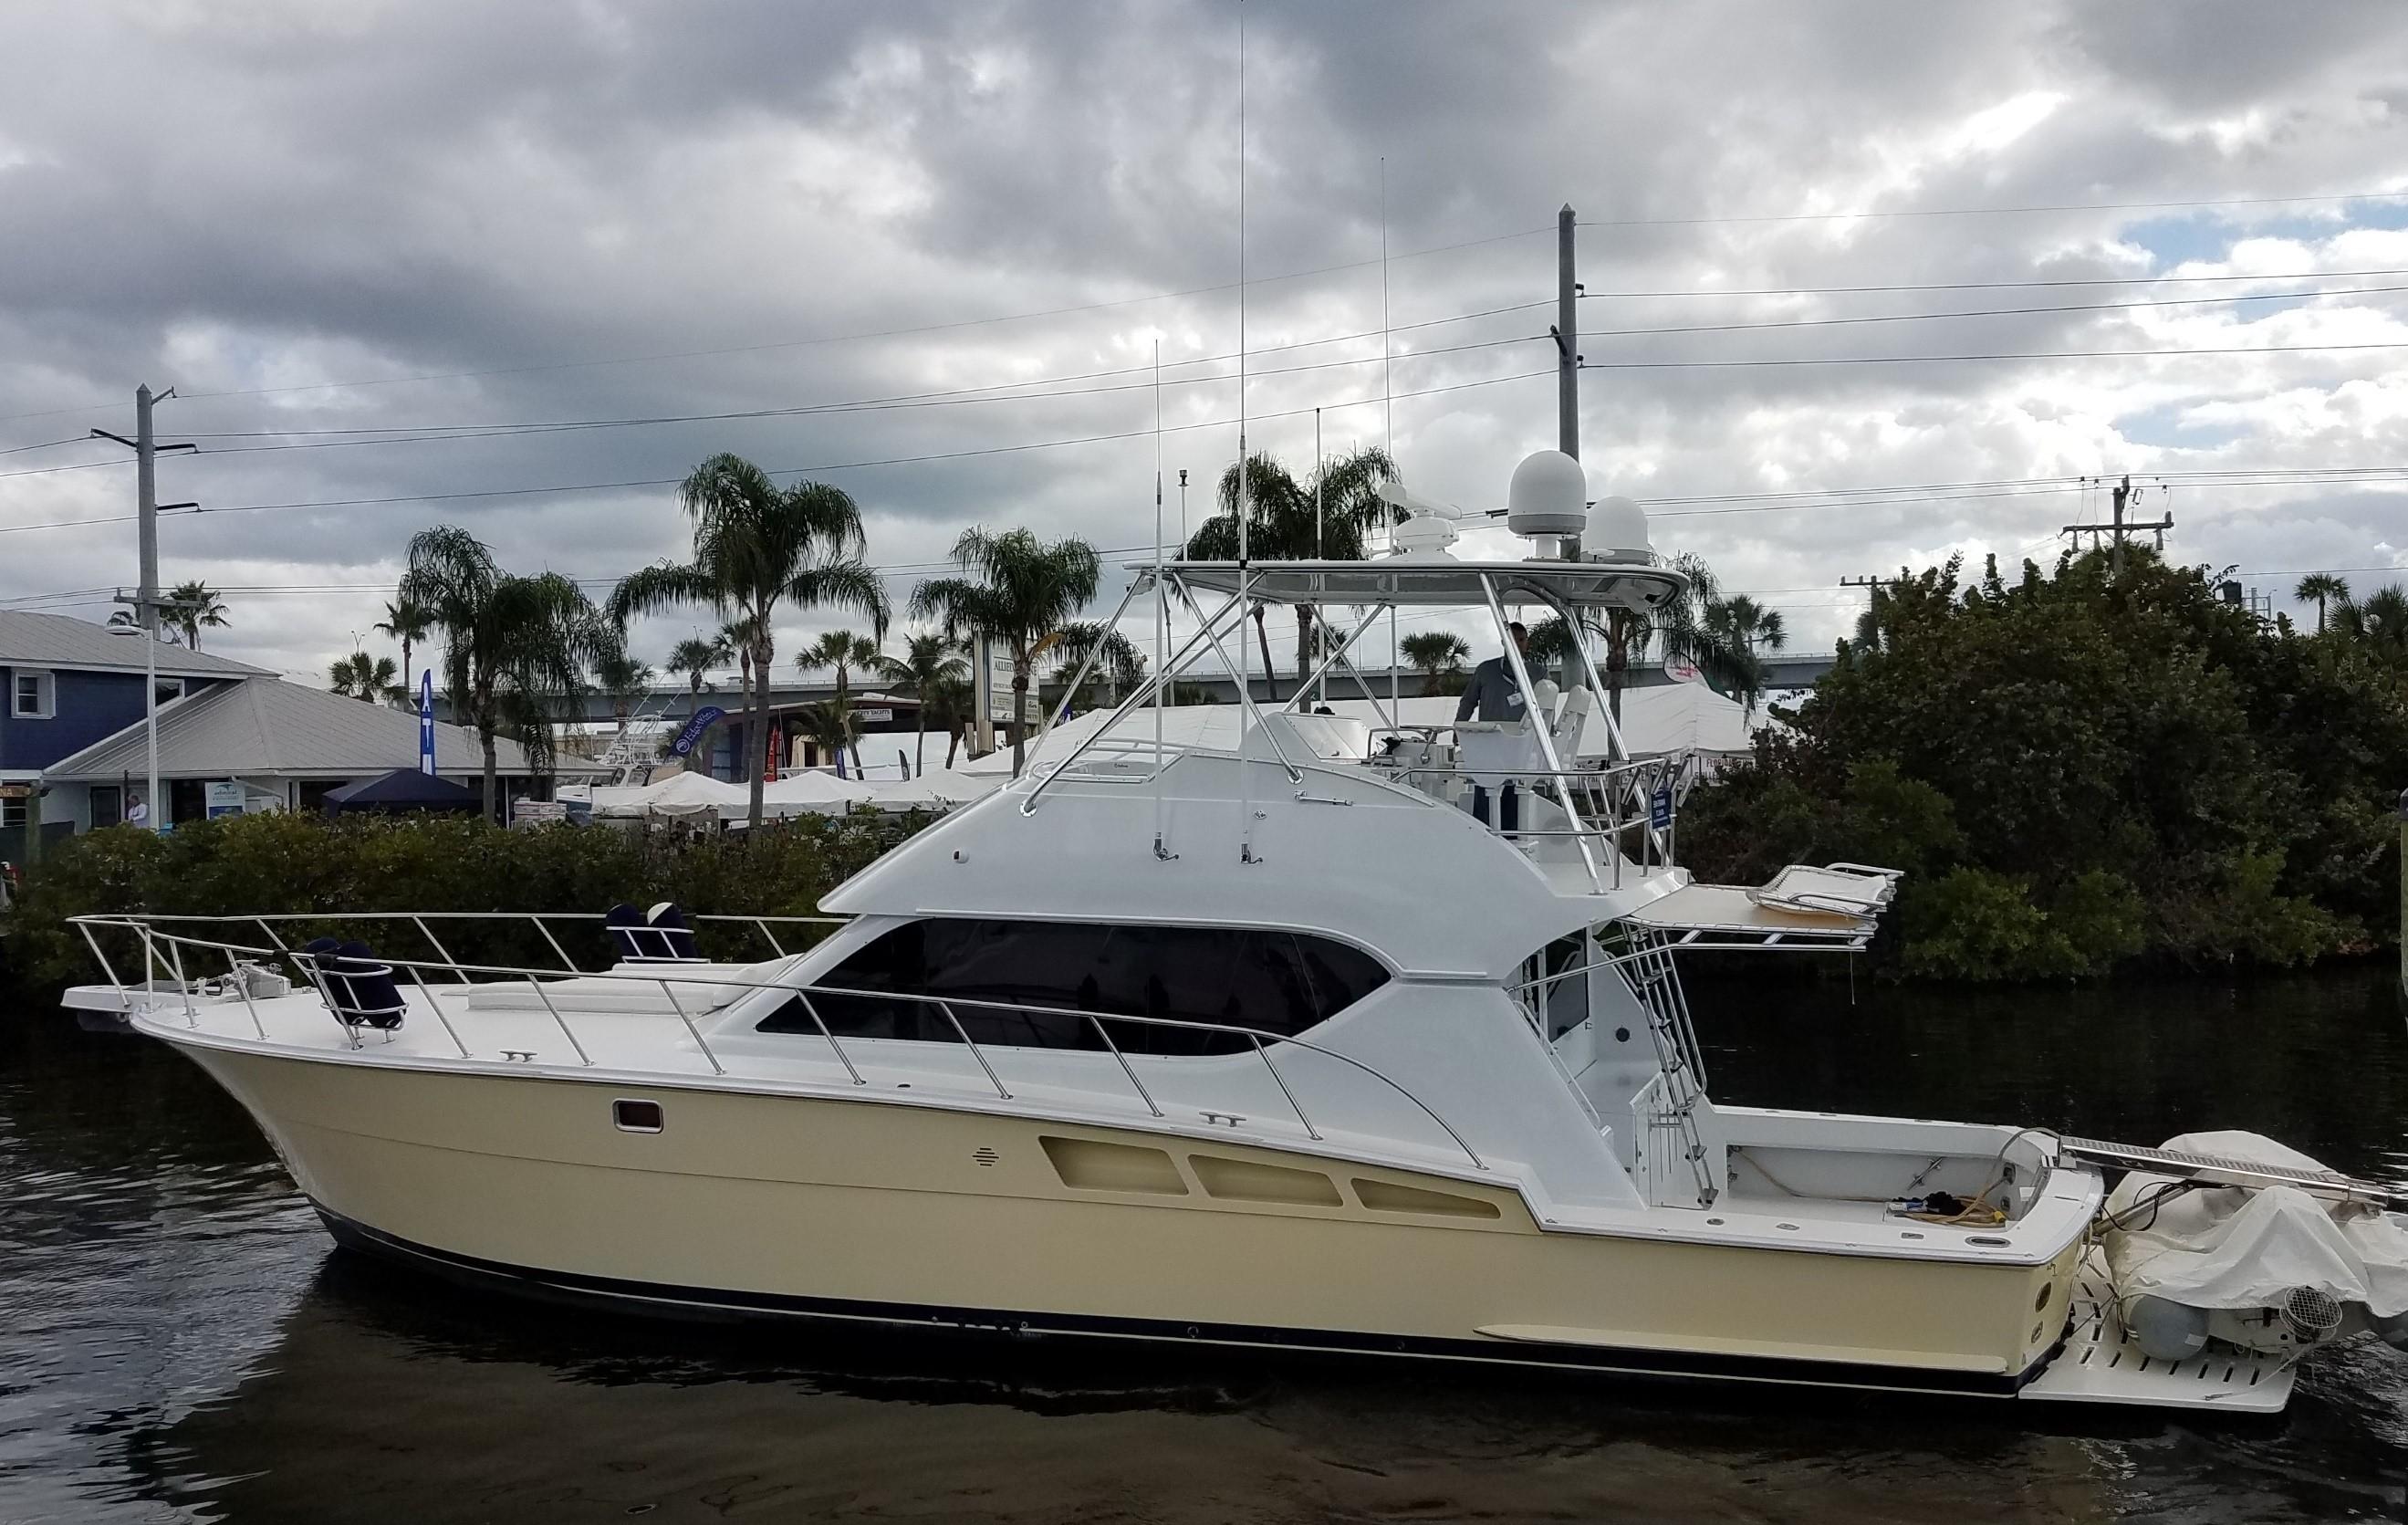 50 ft yacht for sale in michigan